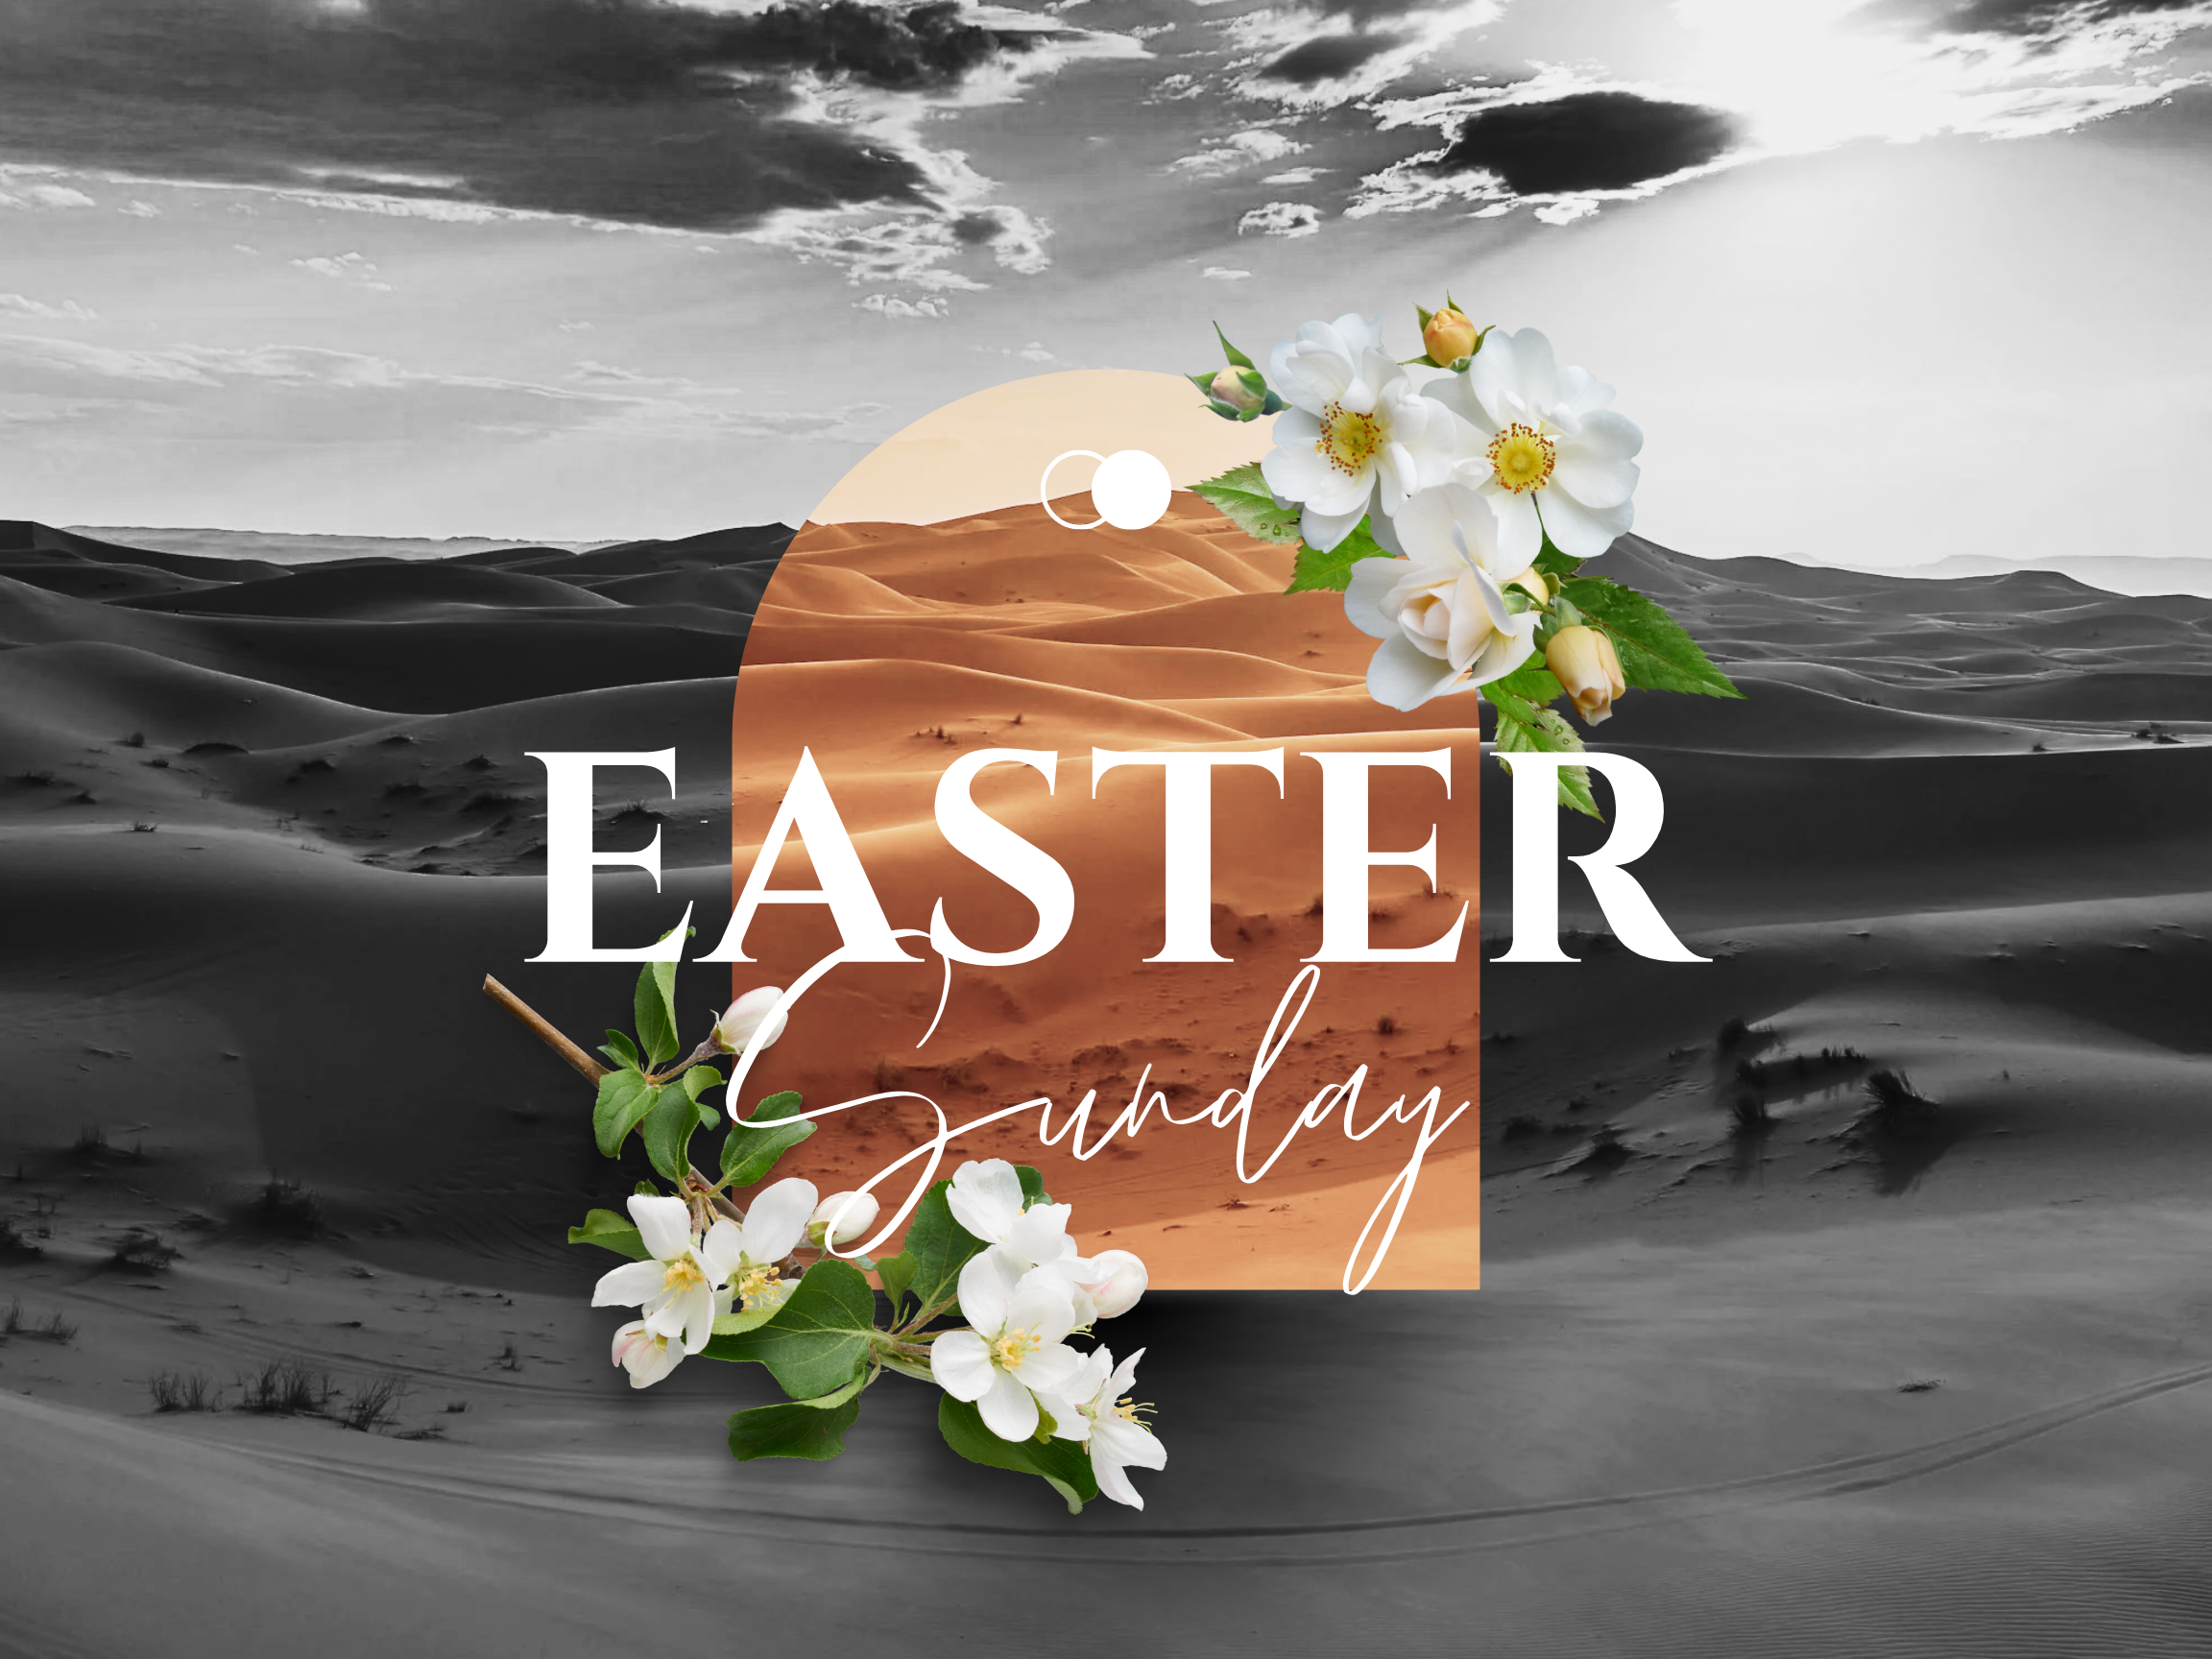 Red Letters Series Finale - Easter Service